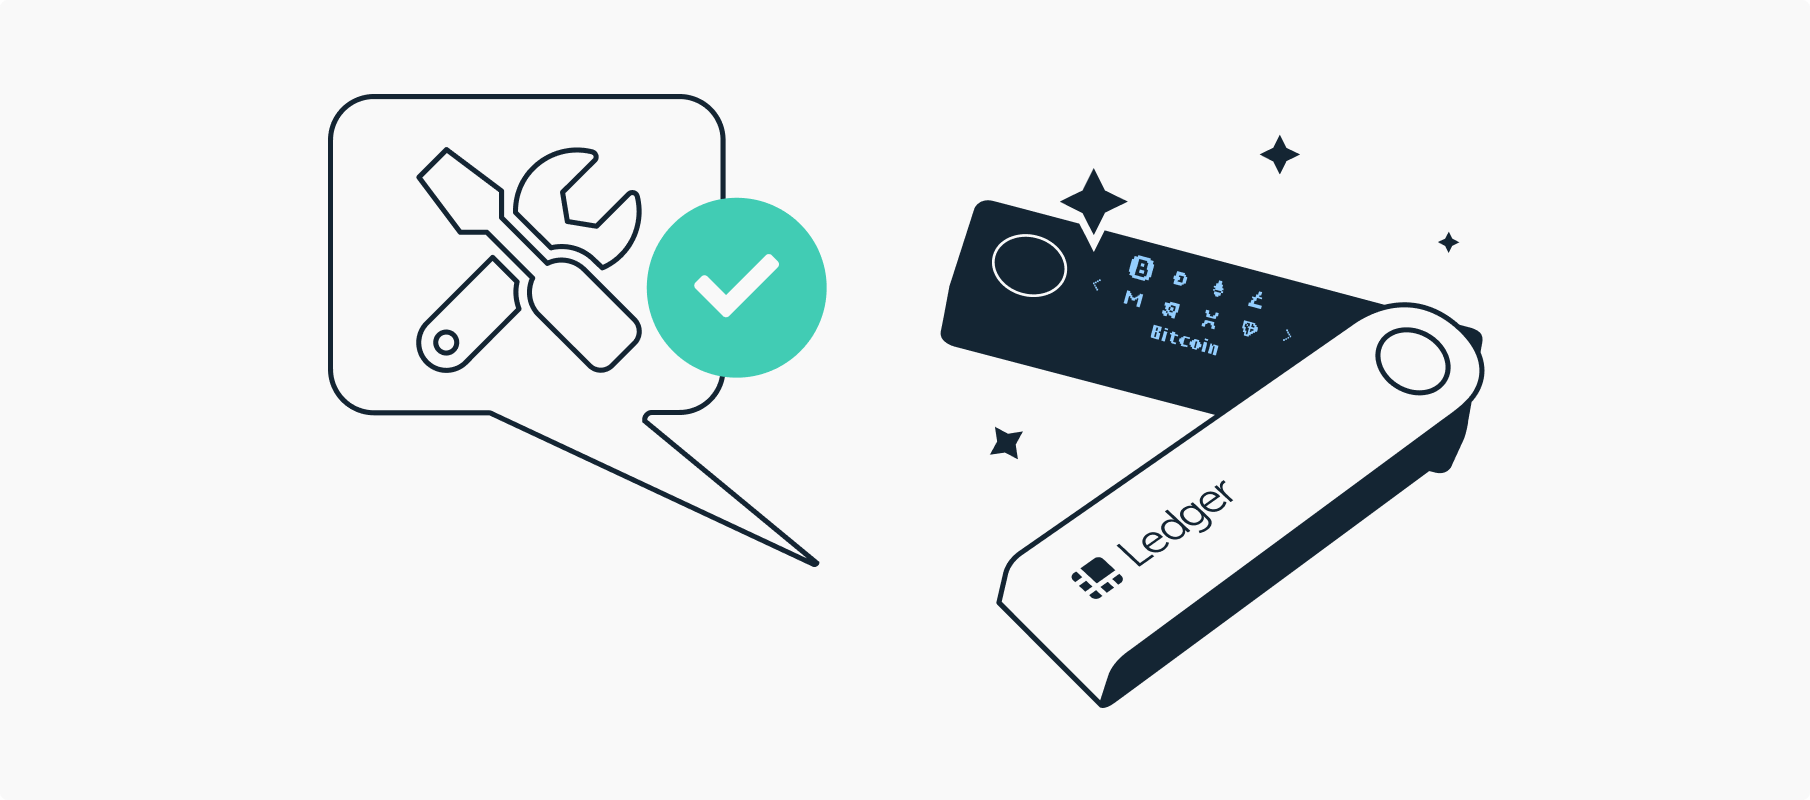 How To Transfer Ethereum From Ledger & Trezor Wallets To Exchanges